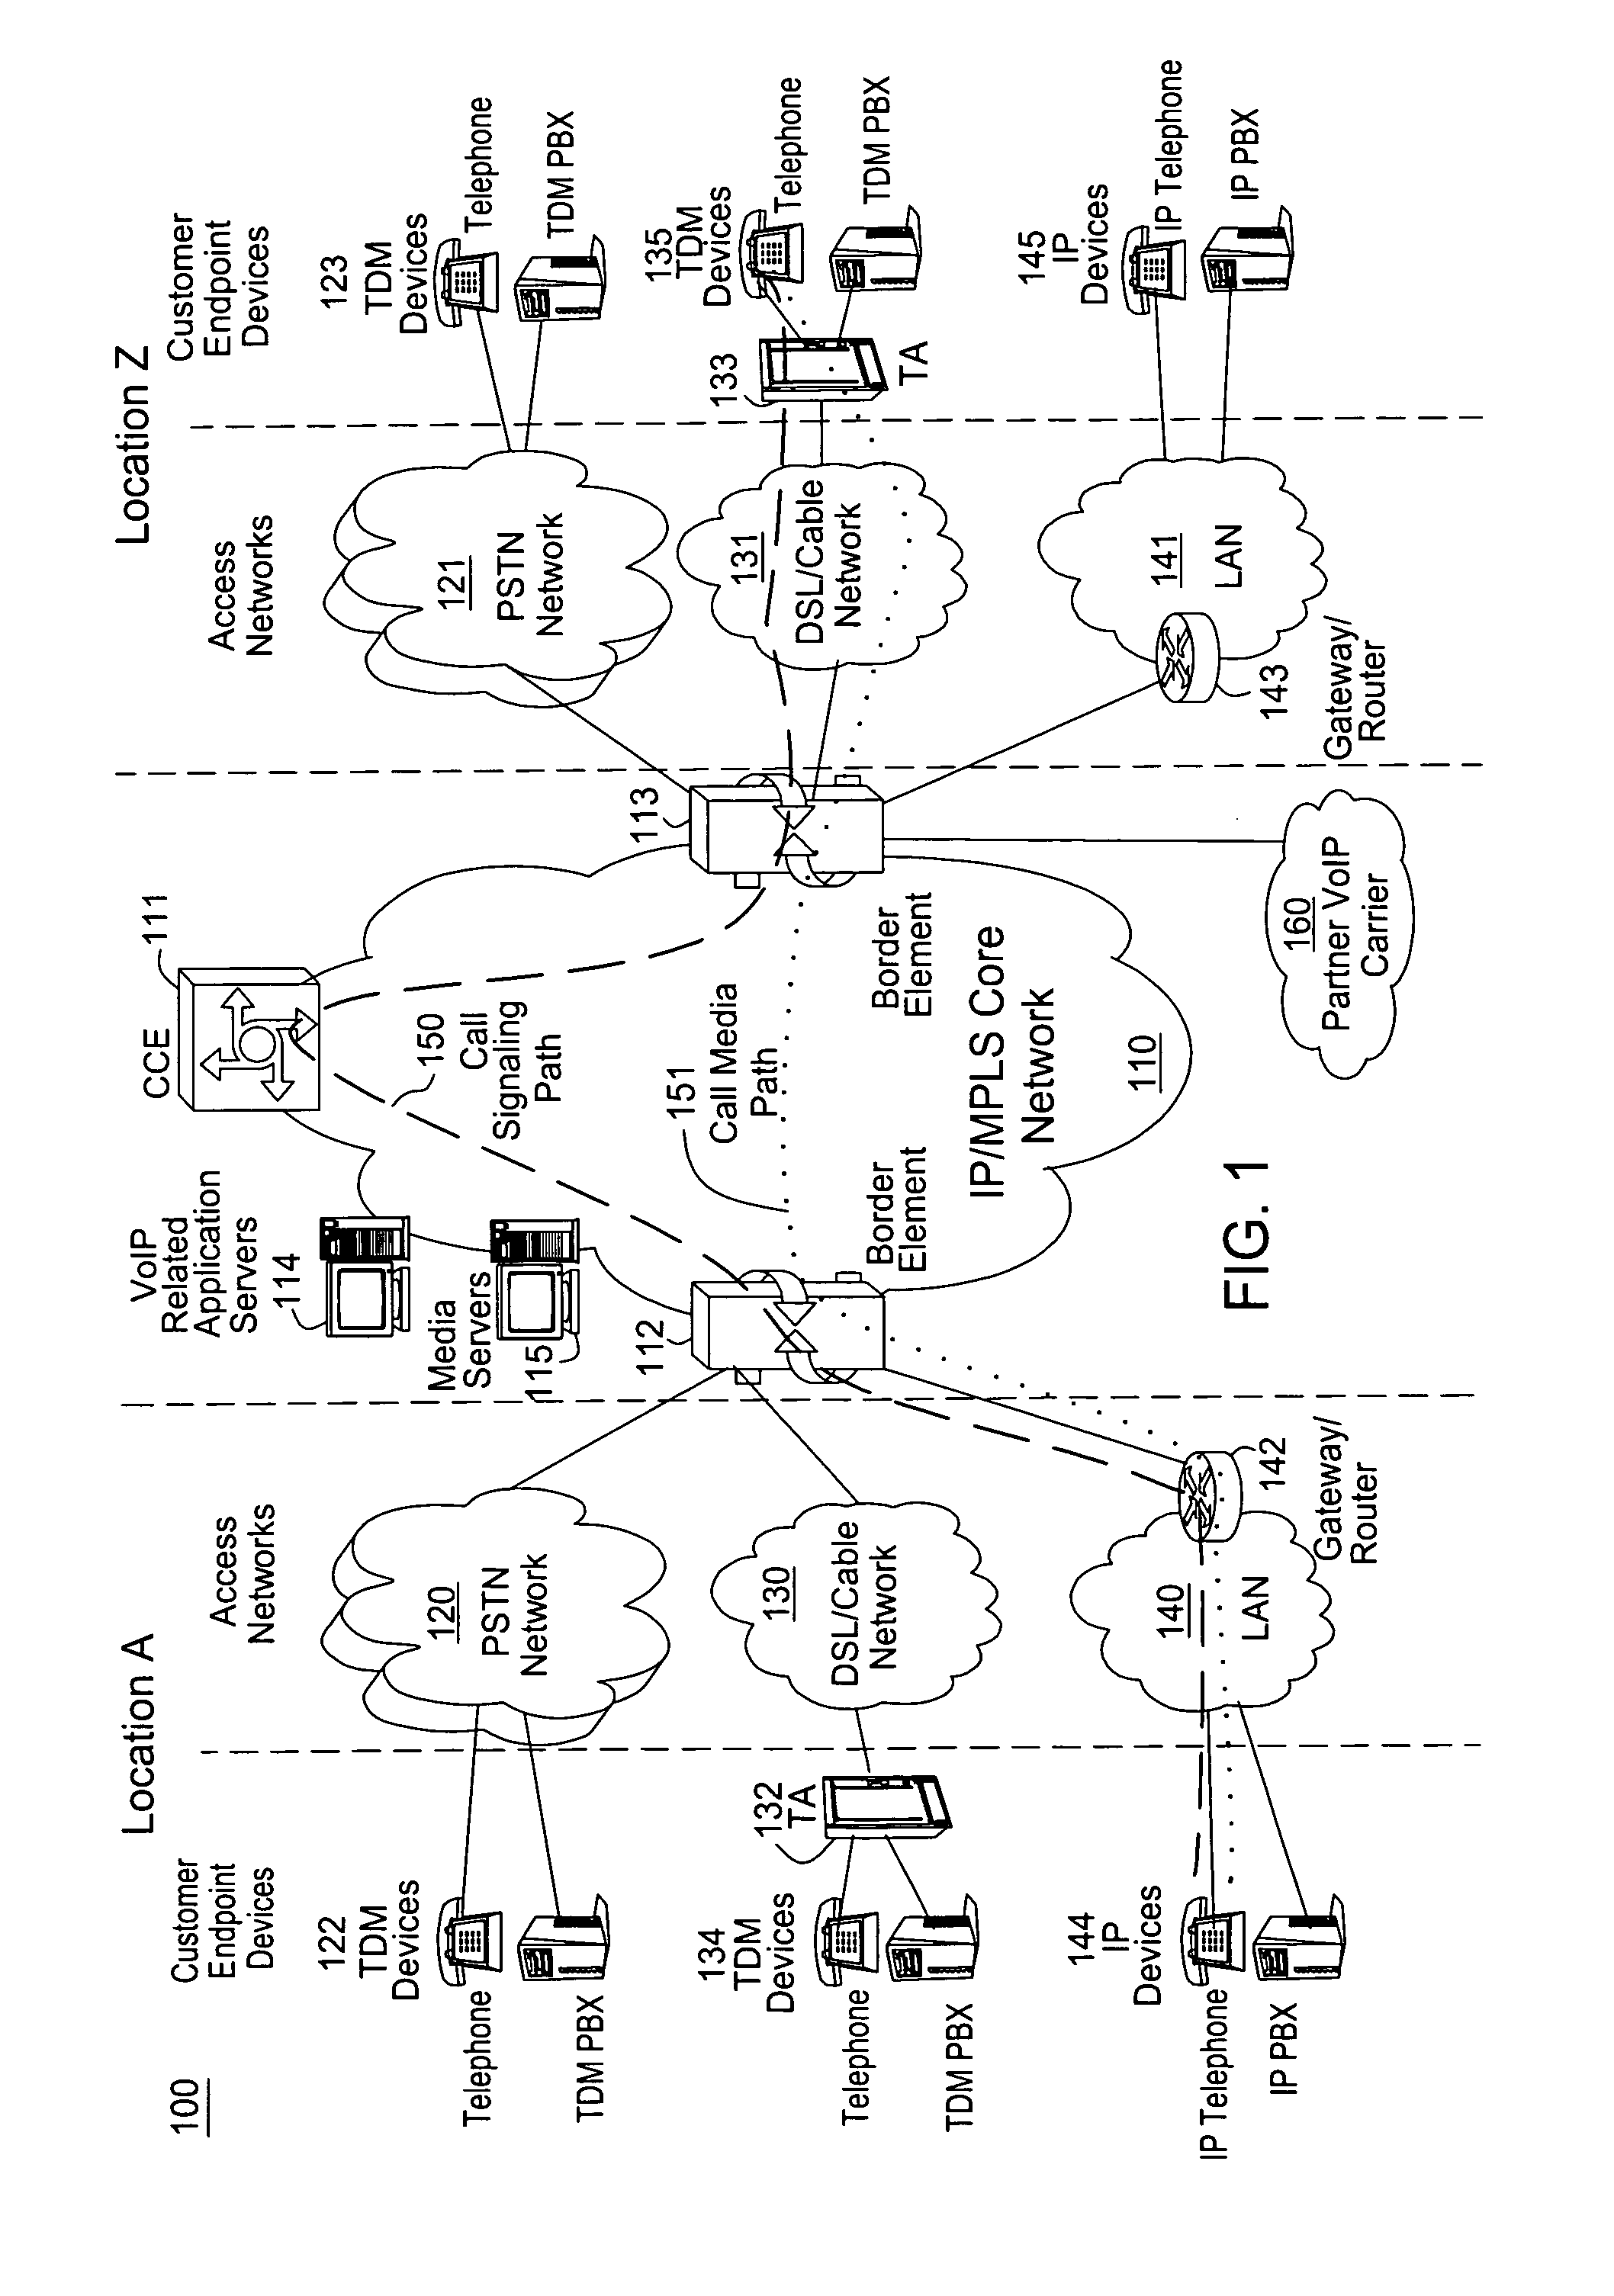 Method and apparatus for providing a voicemail notification